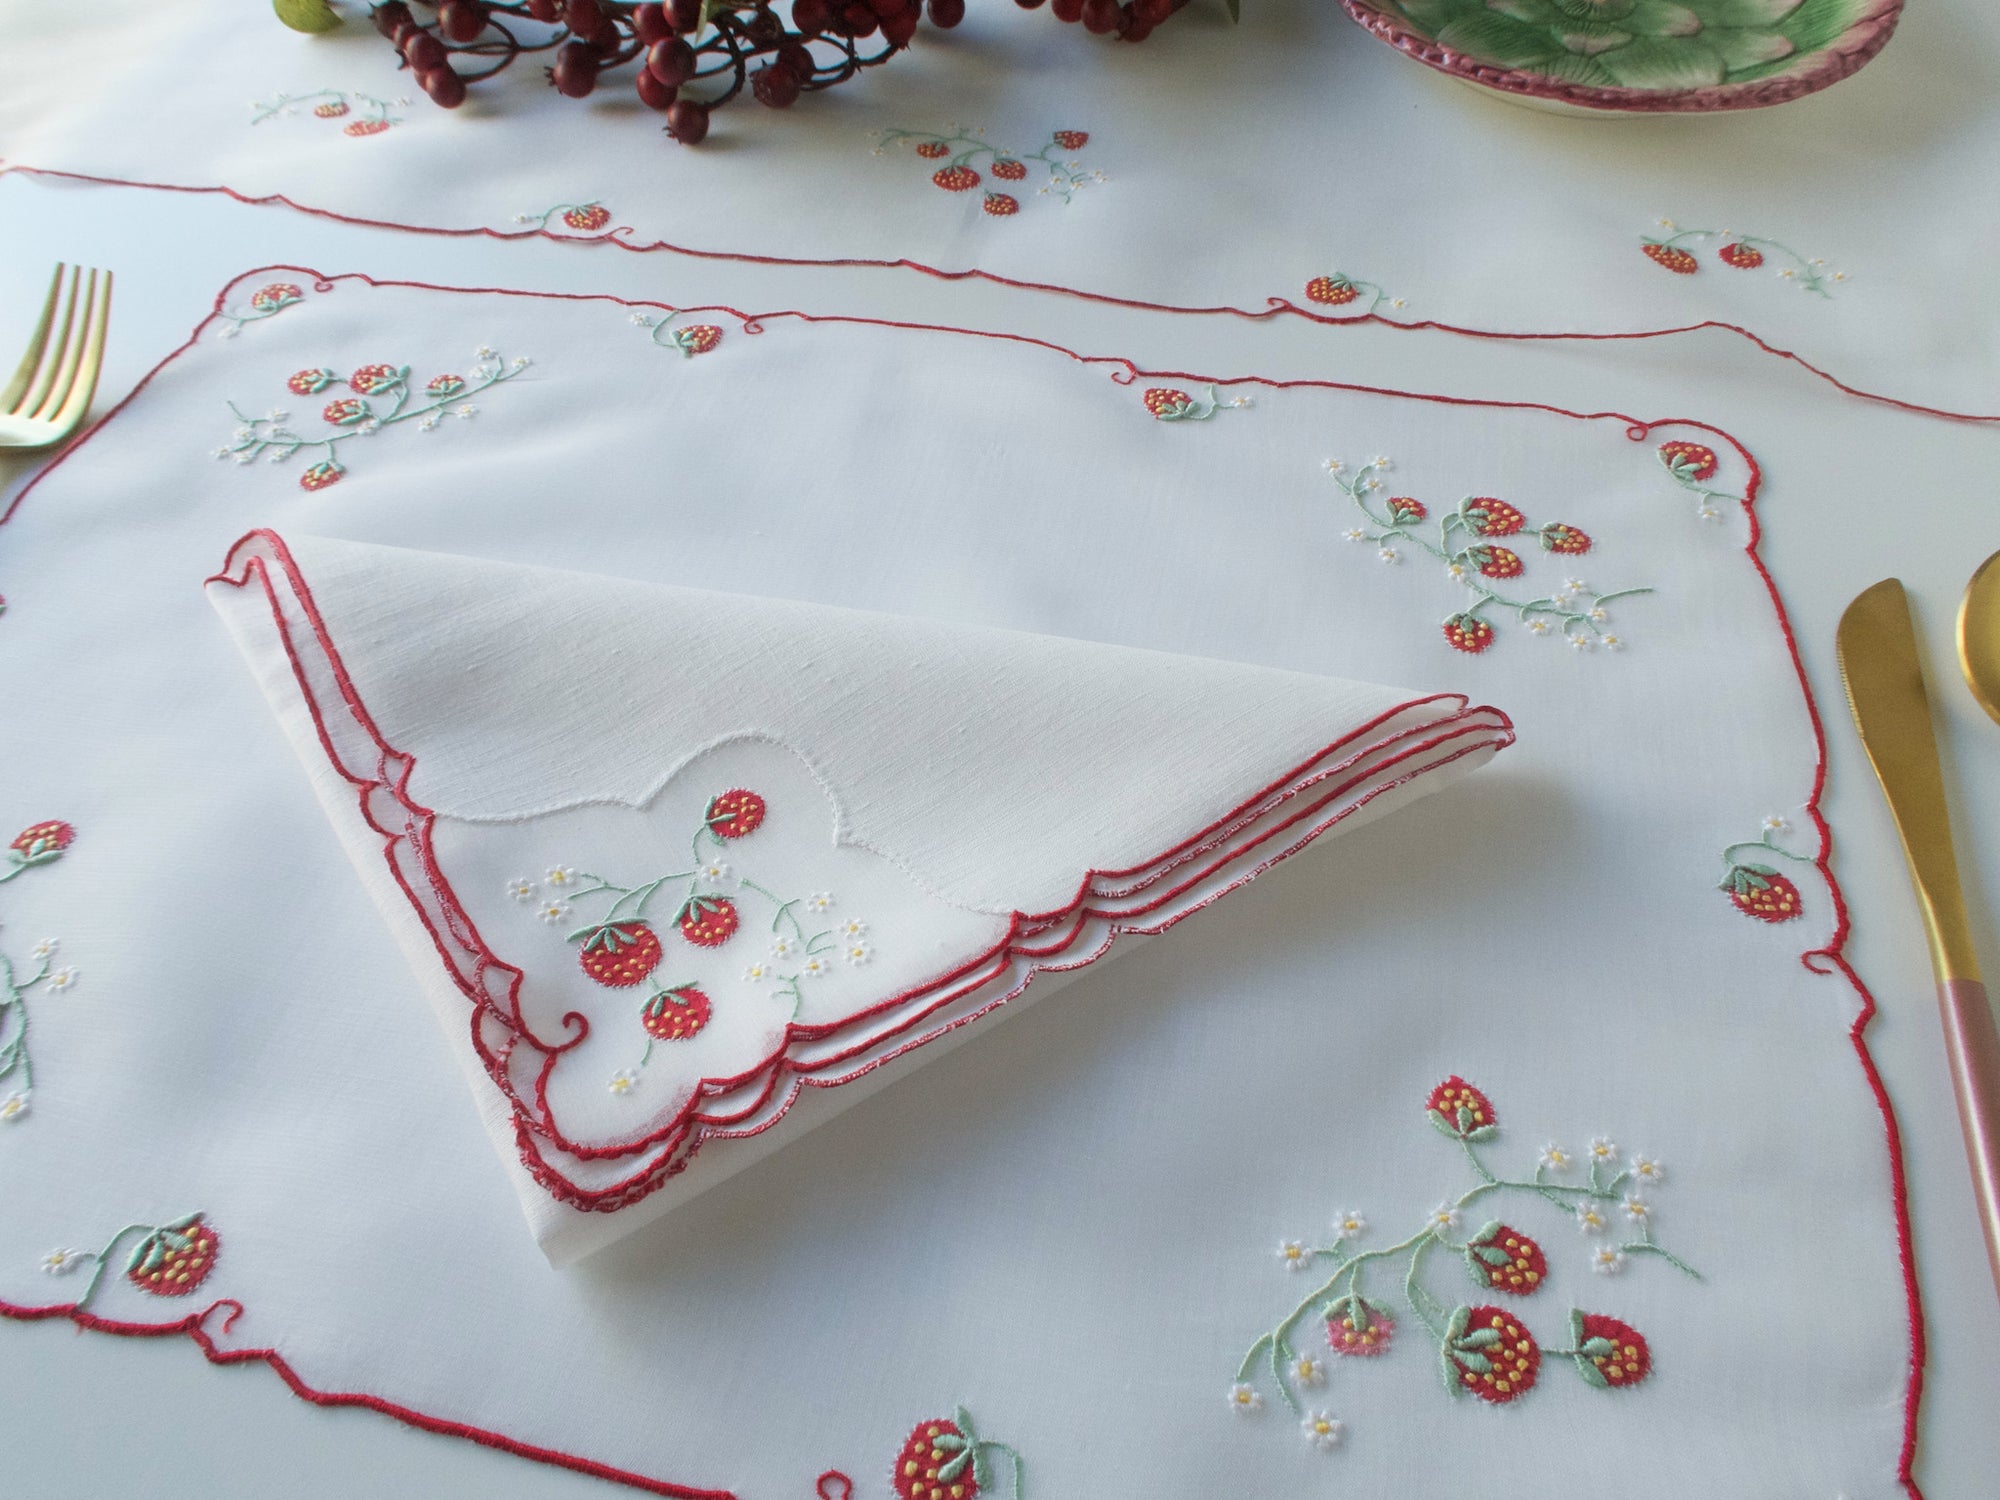 Strawberries Vintage Madeira 17pc Placemat Set for 8